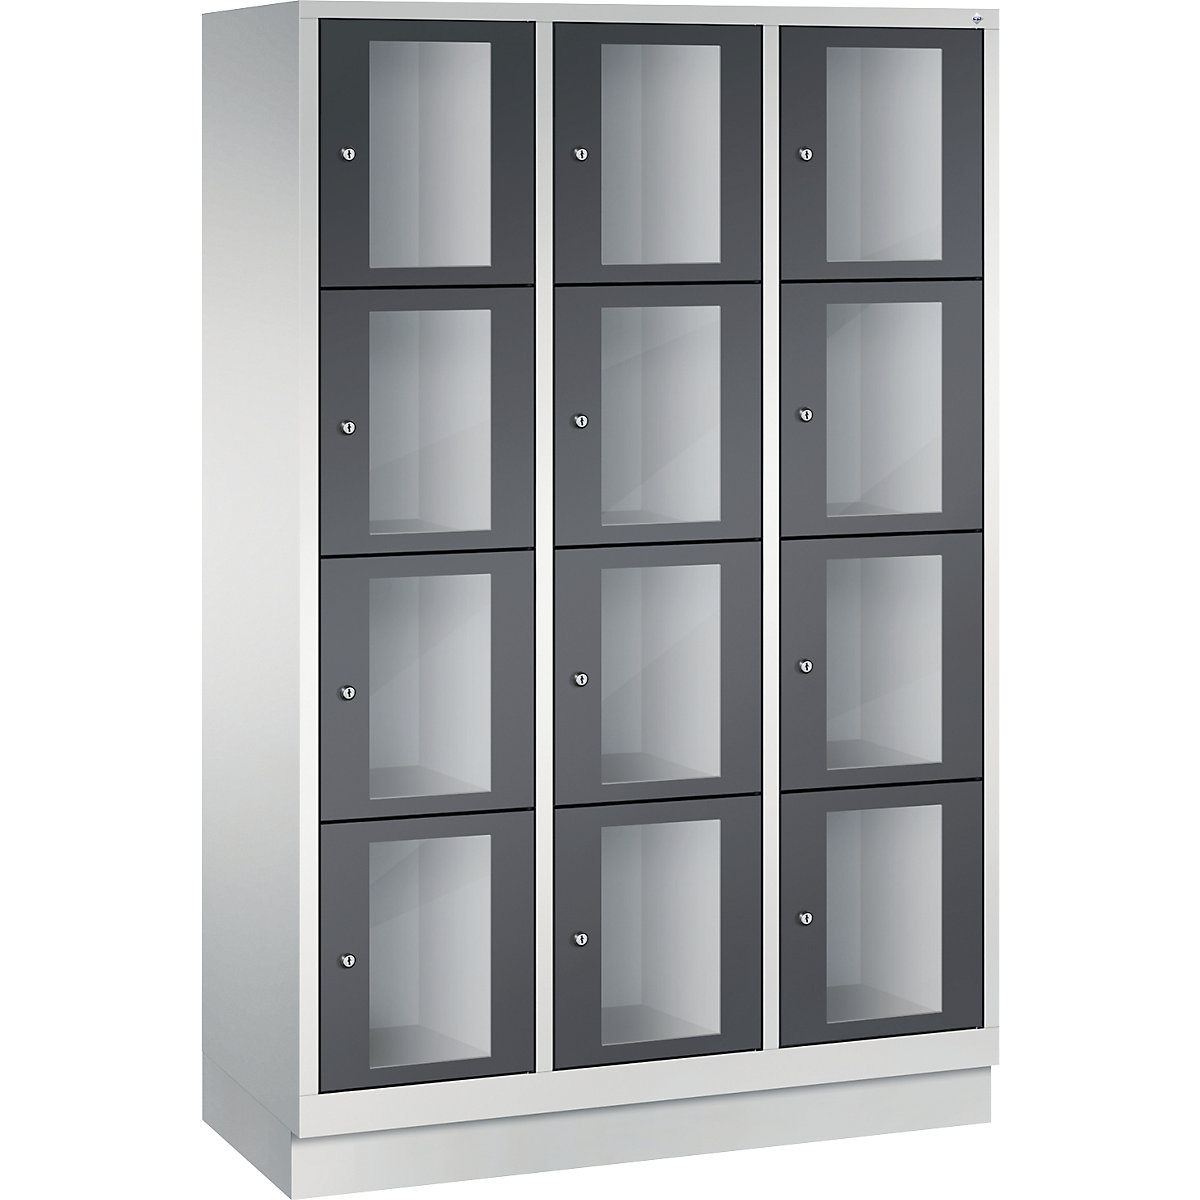 C+P – CLASSIC locker unit, compartment height 375 mm, with plinth, 12 compartments, width 1200 mm, black grey door